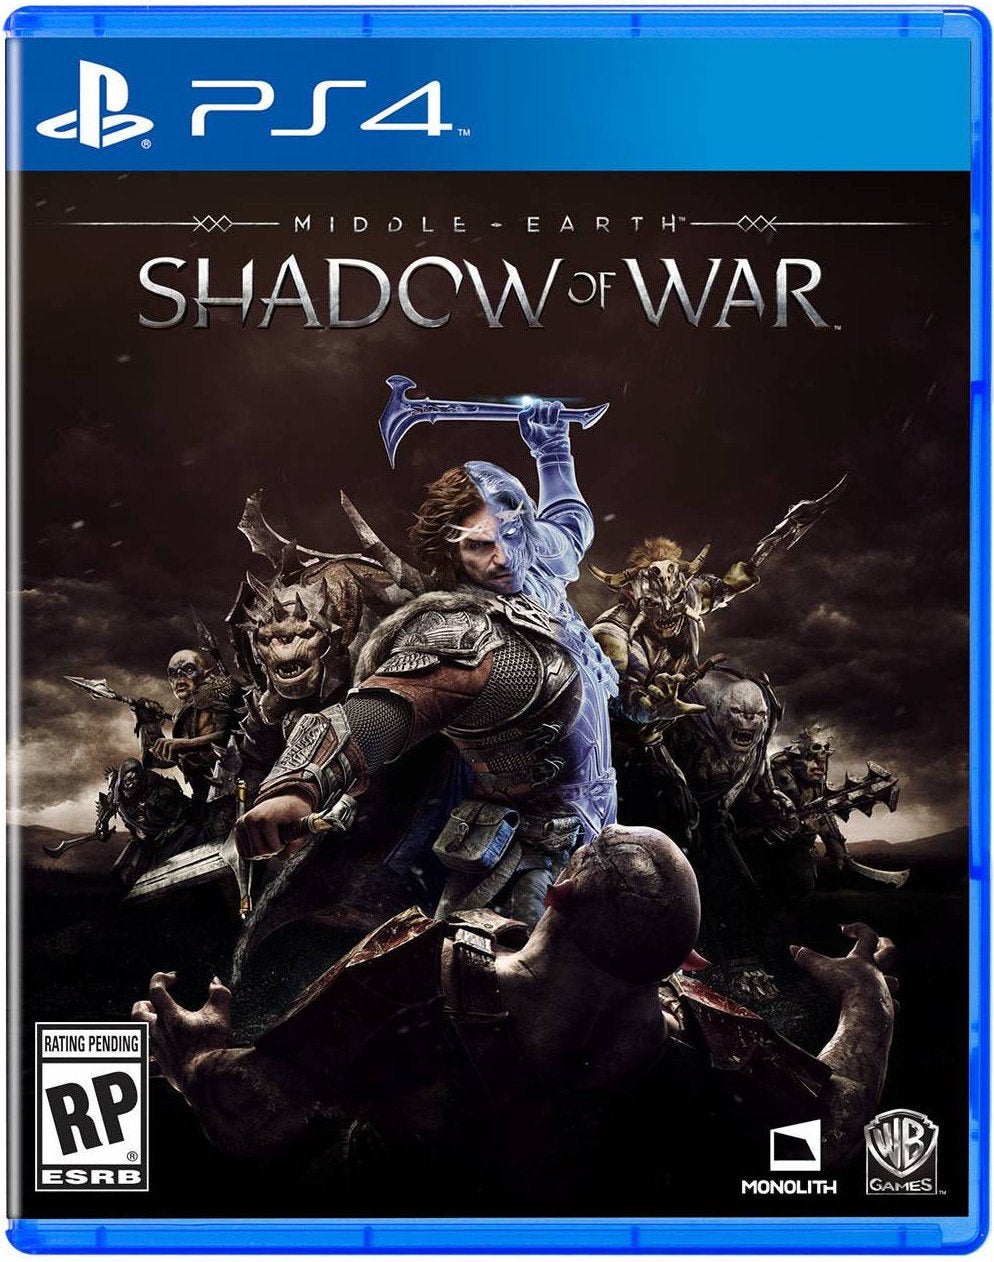 Image for Middle-earth: Shadow of Mordor finally getting the sequel everyone's been asking for as retailer outs Shadow of War